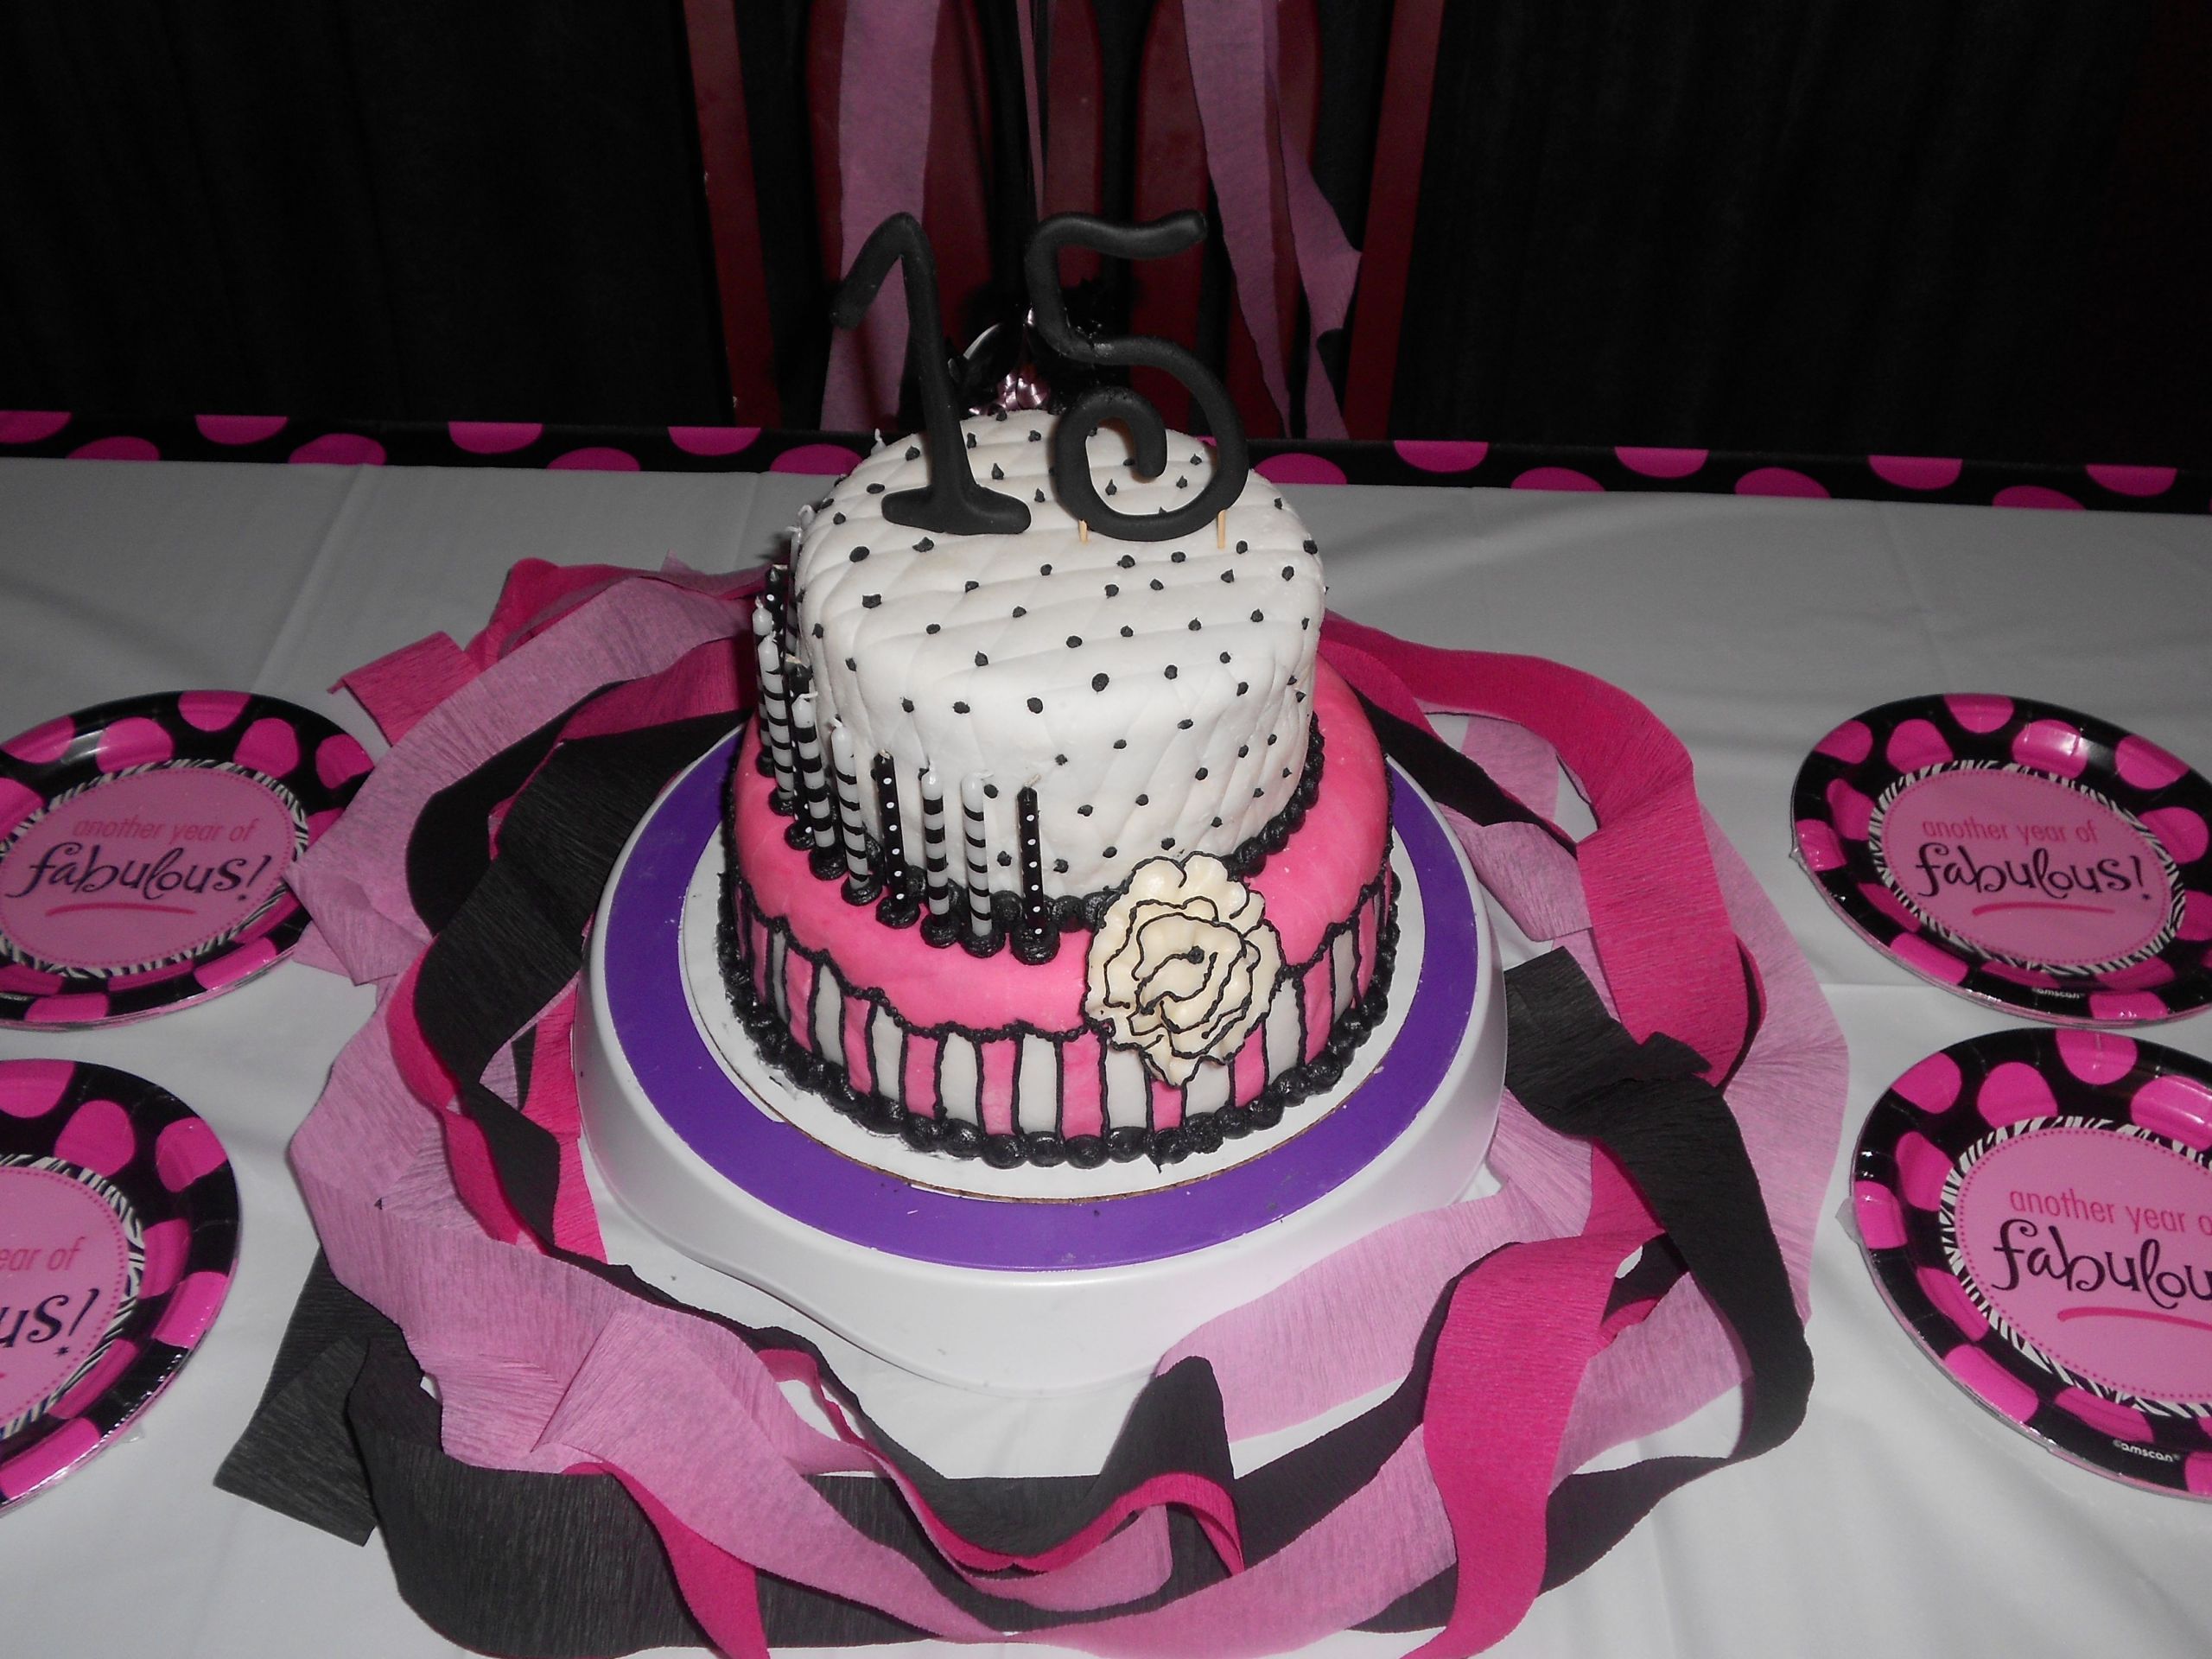 15th Birthday Cakes
 Kylie s 15th Birthday cake Now THAT S a CAKE